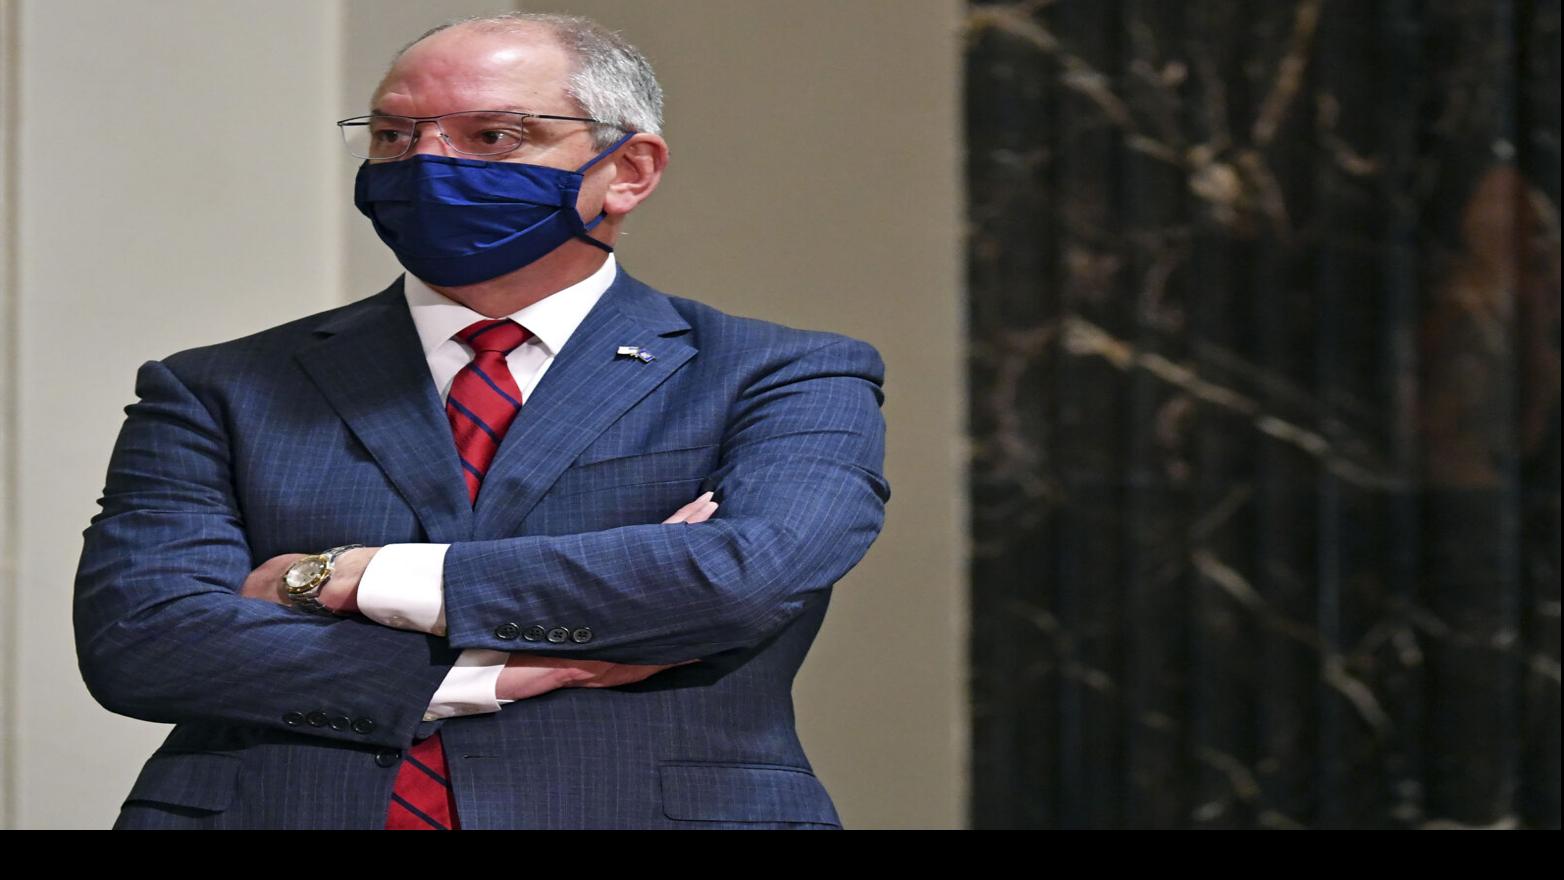 Louisiana governor lifts more COVID mask restrictions after CDC